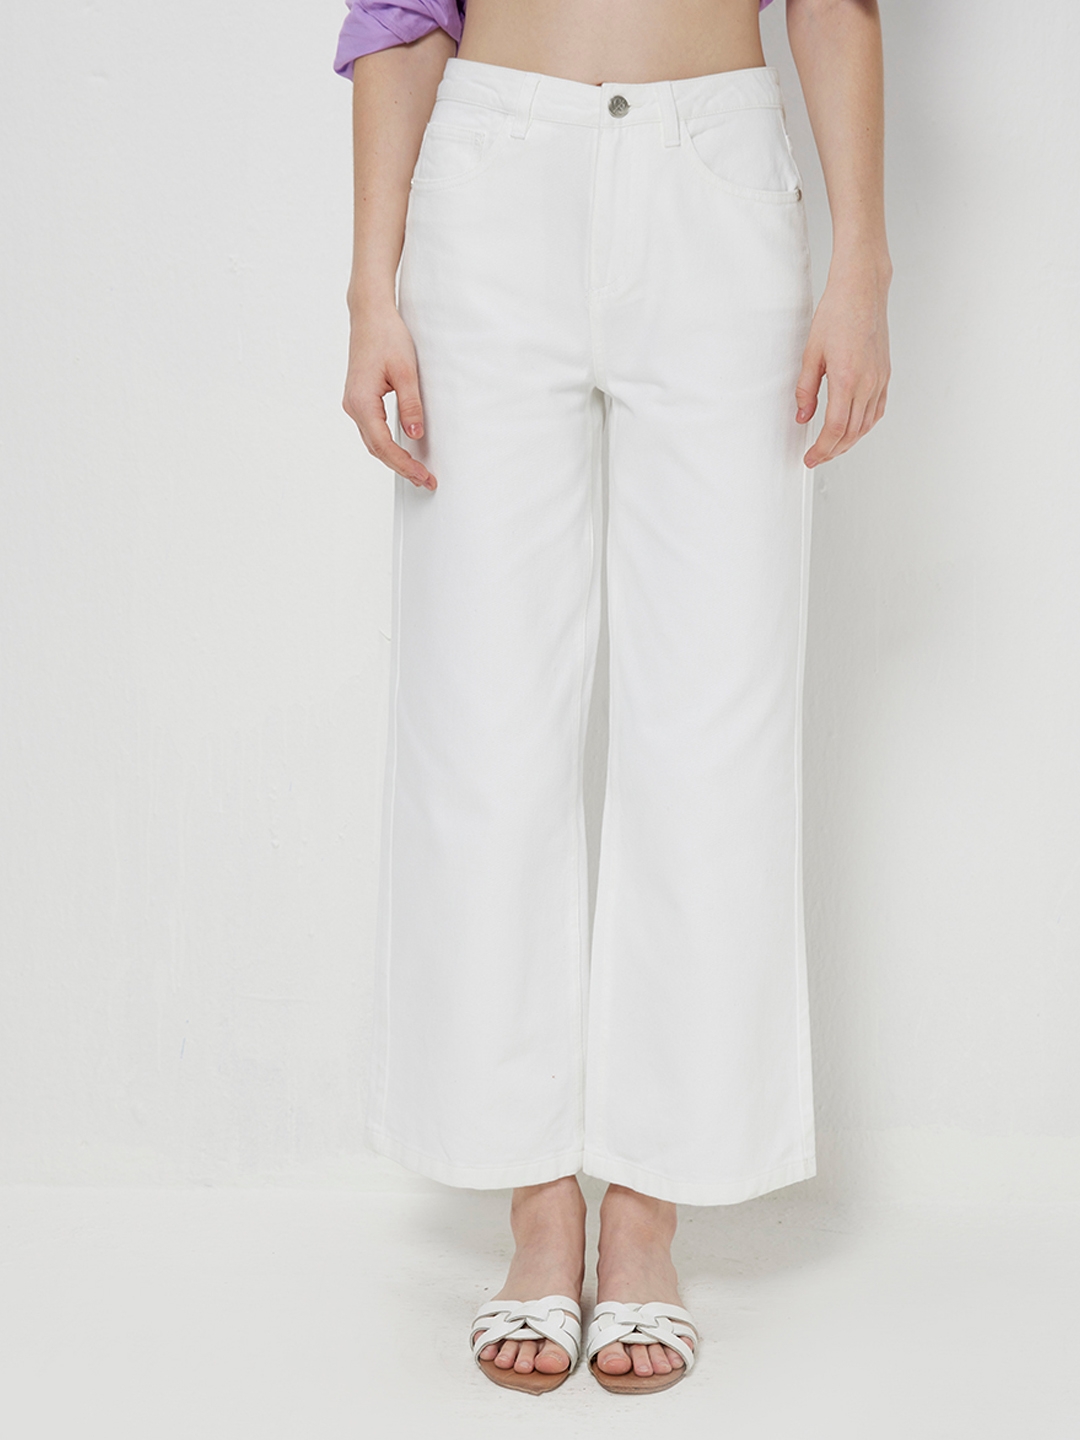 Buy Nuon Solid Off White Loose Fit Cargo Pants from Westside